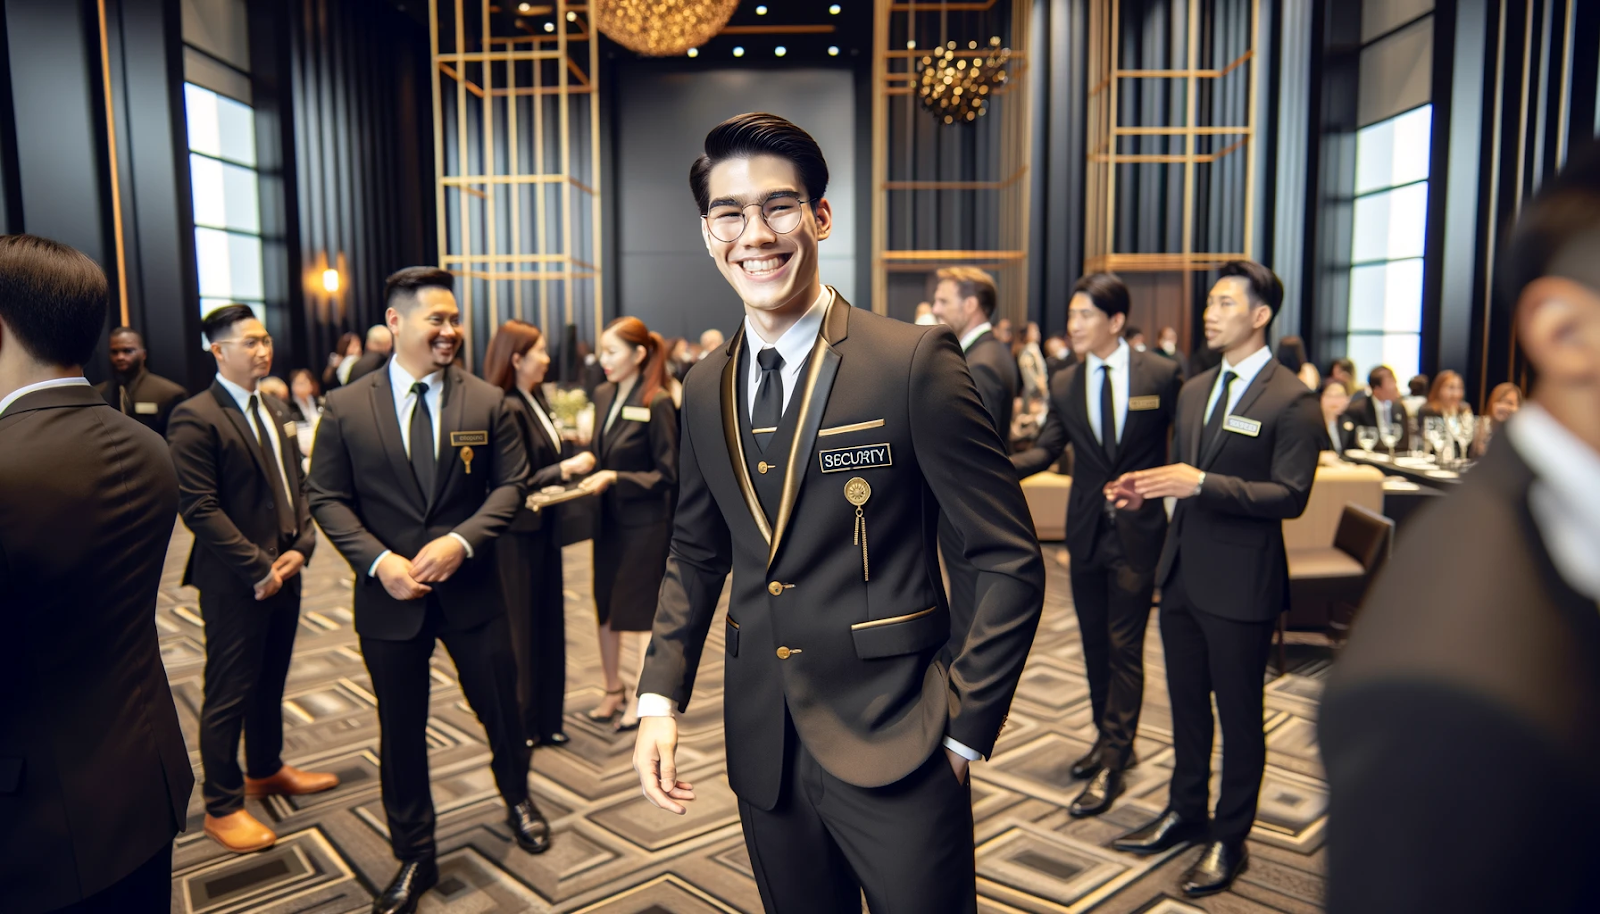 Cheerful security guard assisting attendees at a corporate event security setup in a modern conference hall with black and gold decor